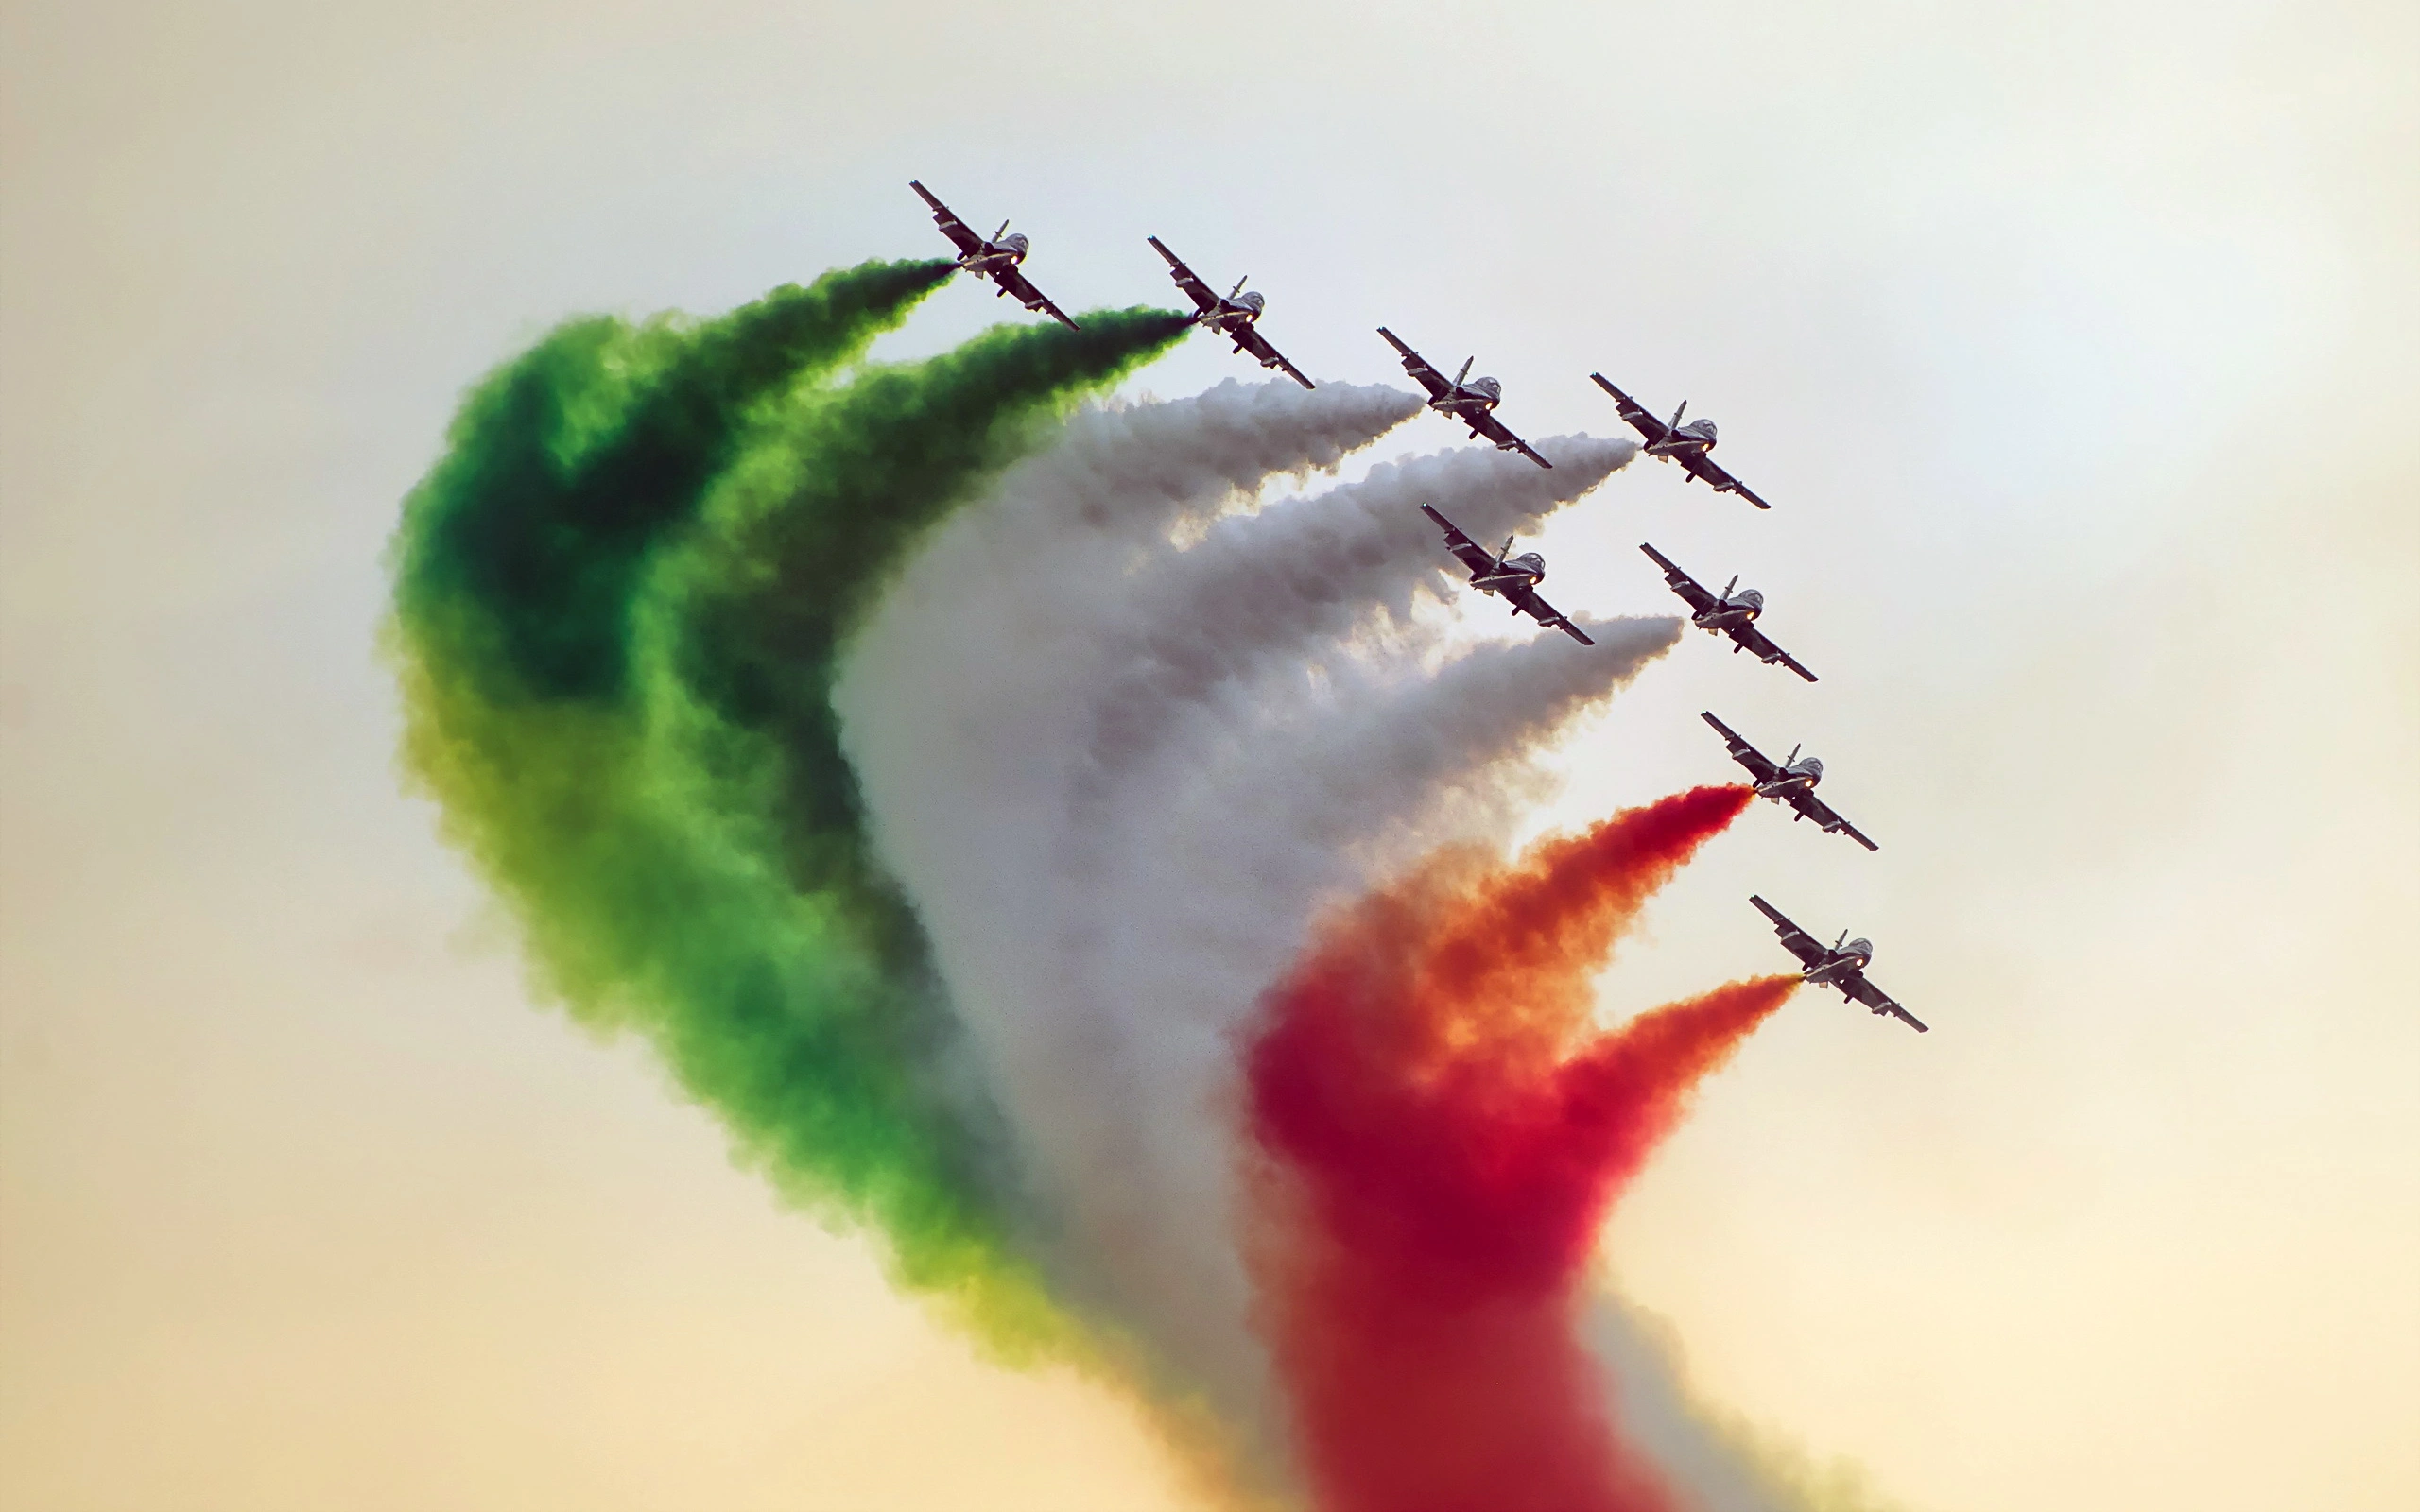 Indian Air Force Jet Fighters332858892 - Indian Air Force Jet Fighters - Jet, Indian, Force, Fighters, Amercian, Air